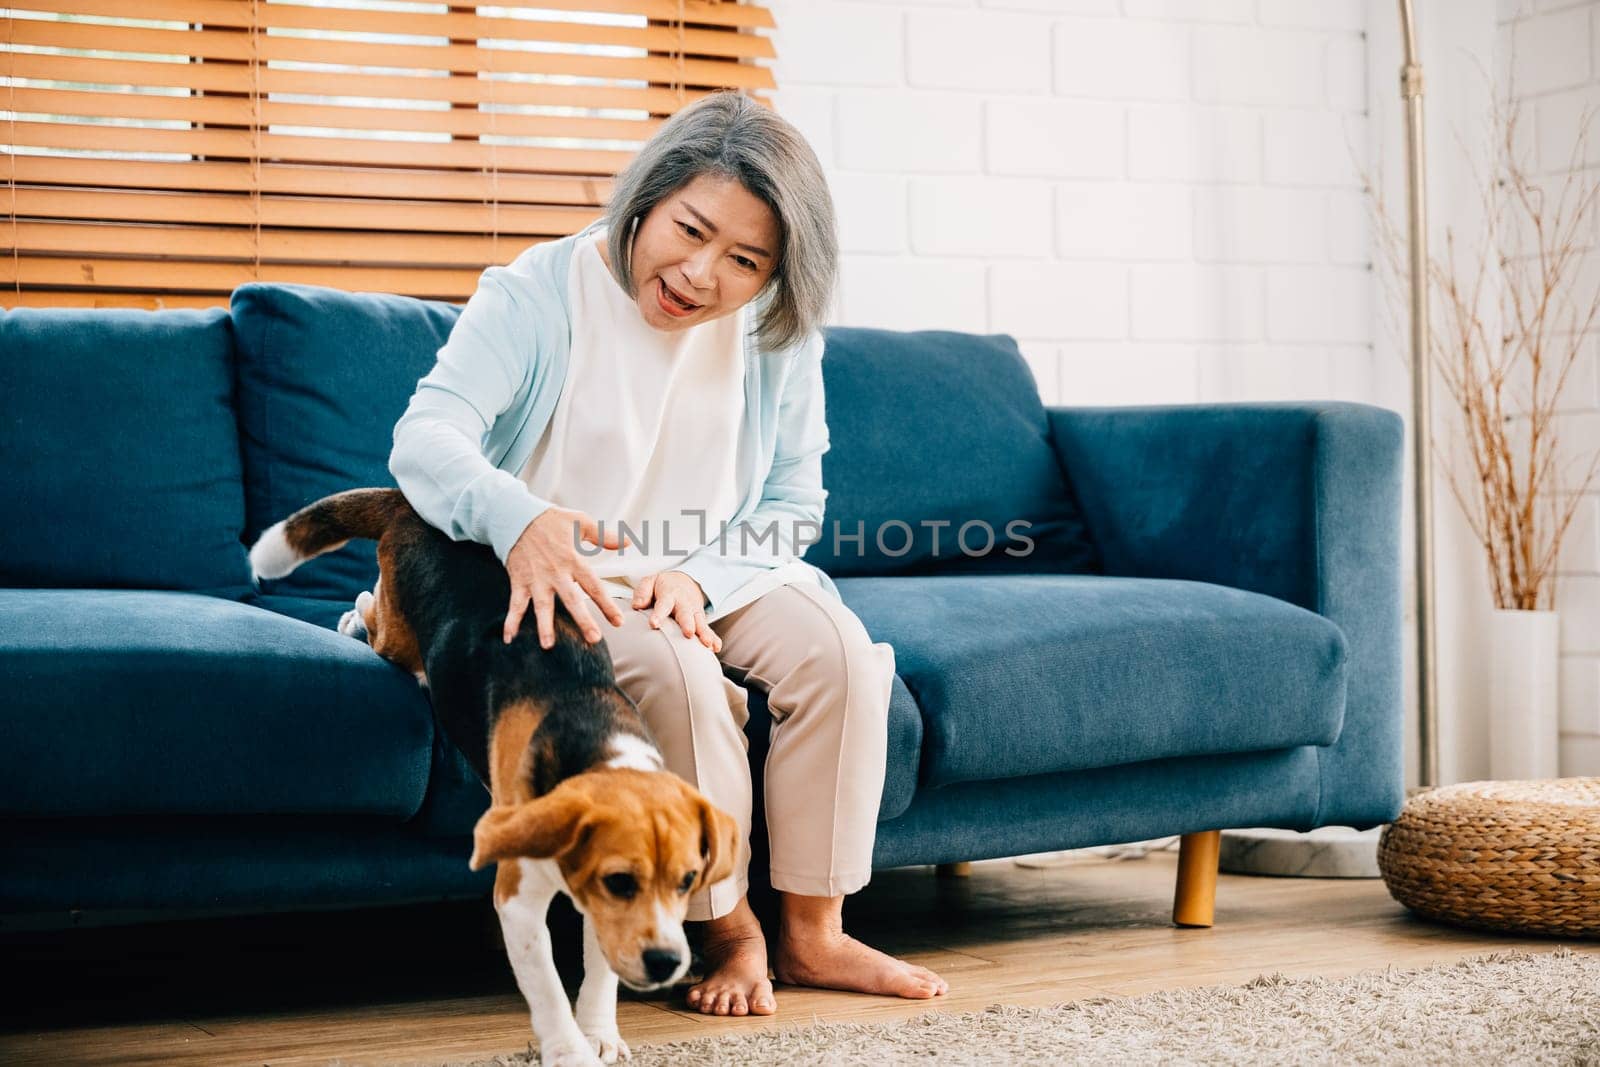 A portrait of love and joy, An elderly woman and her Beagle puppy share a heartwarming moment in their living room. Their friendship and smiles illuminate the room, creating a haven of happiness. by Sorapop